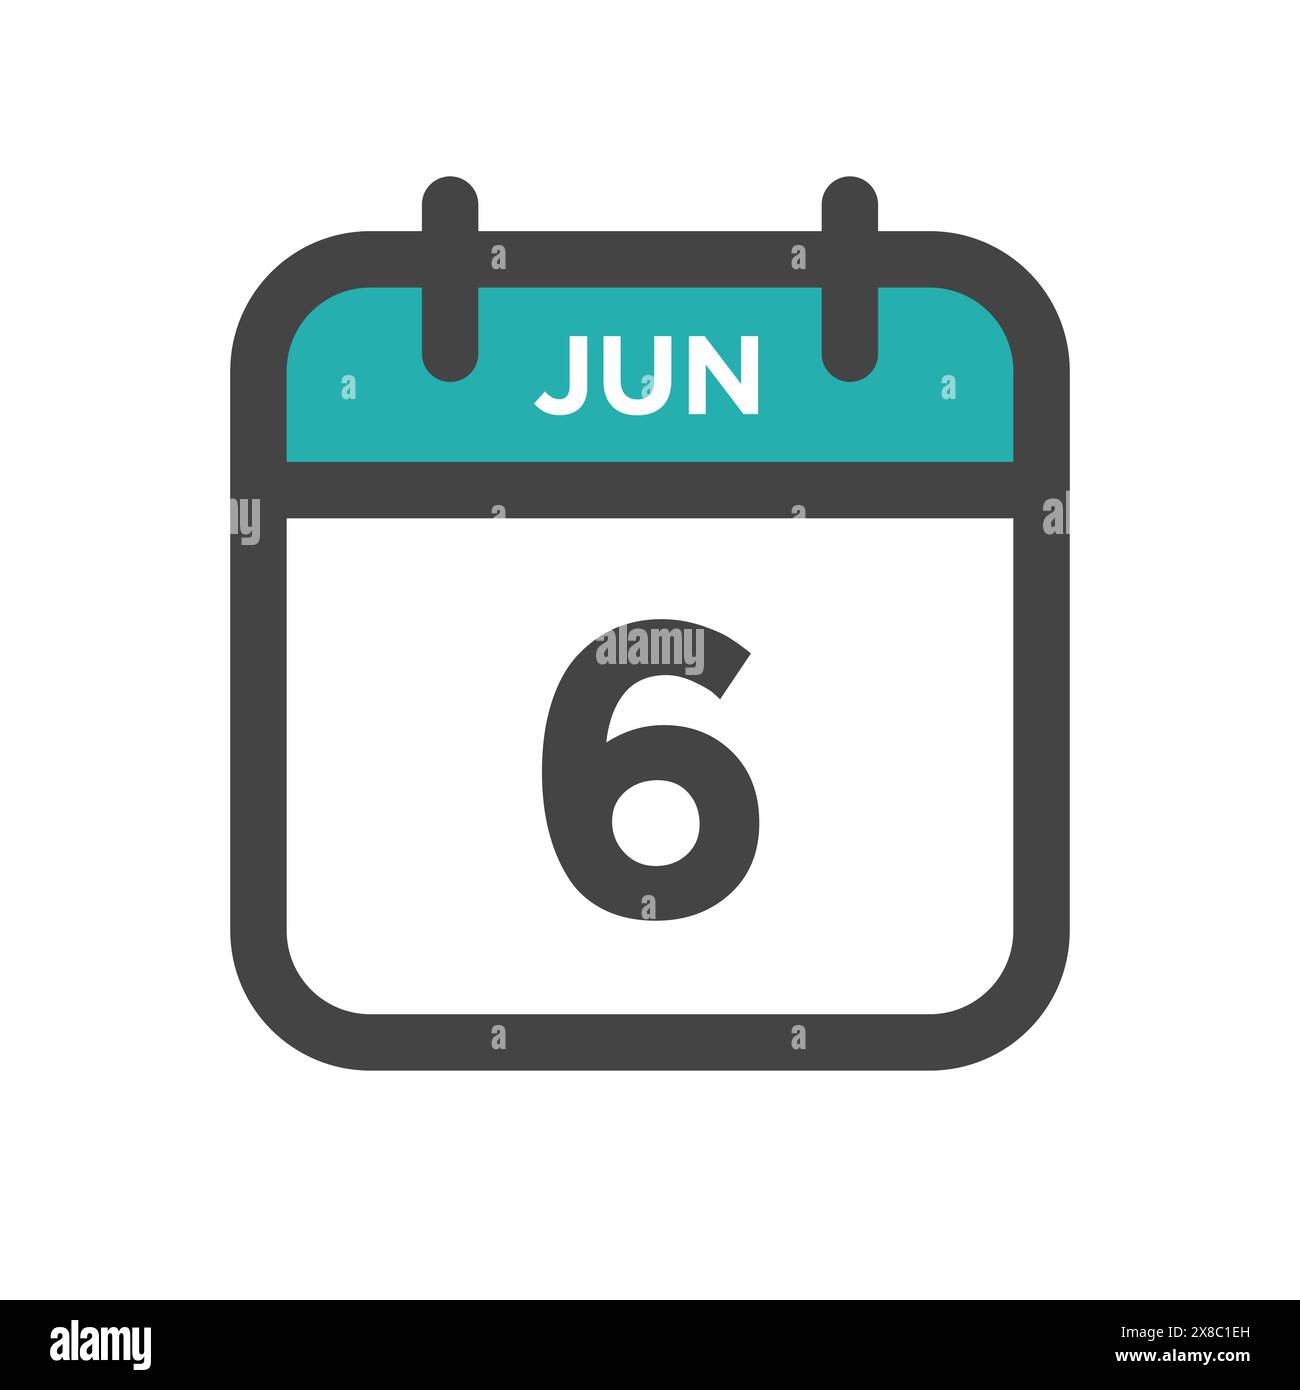 June 6 Calendar Day or Calender Date for Deadline and Appointment Stock Vector